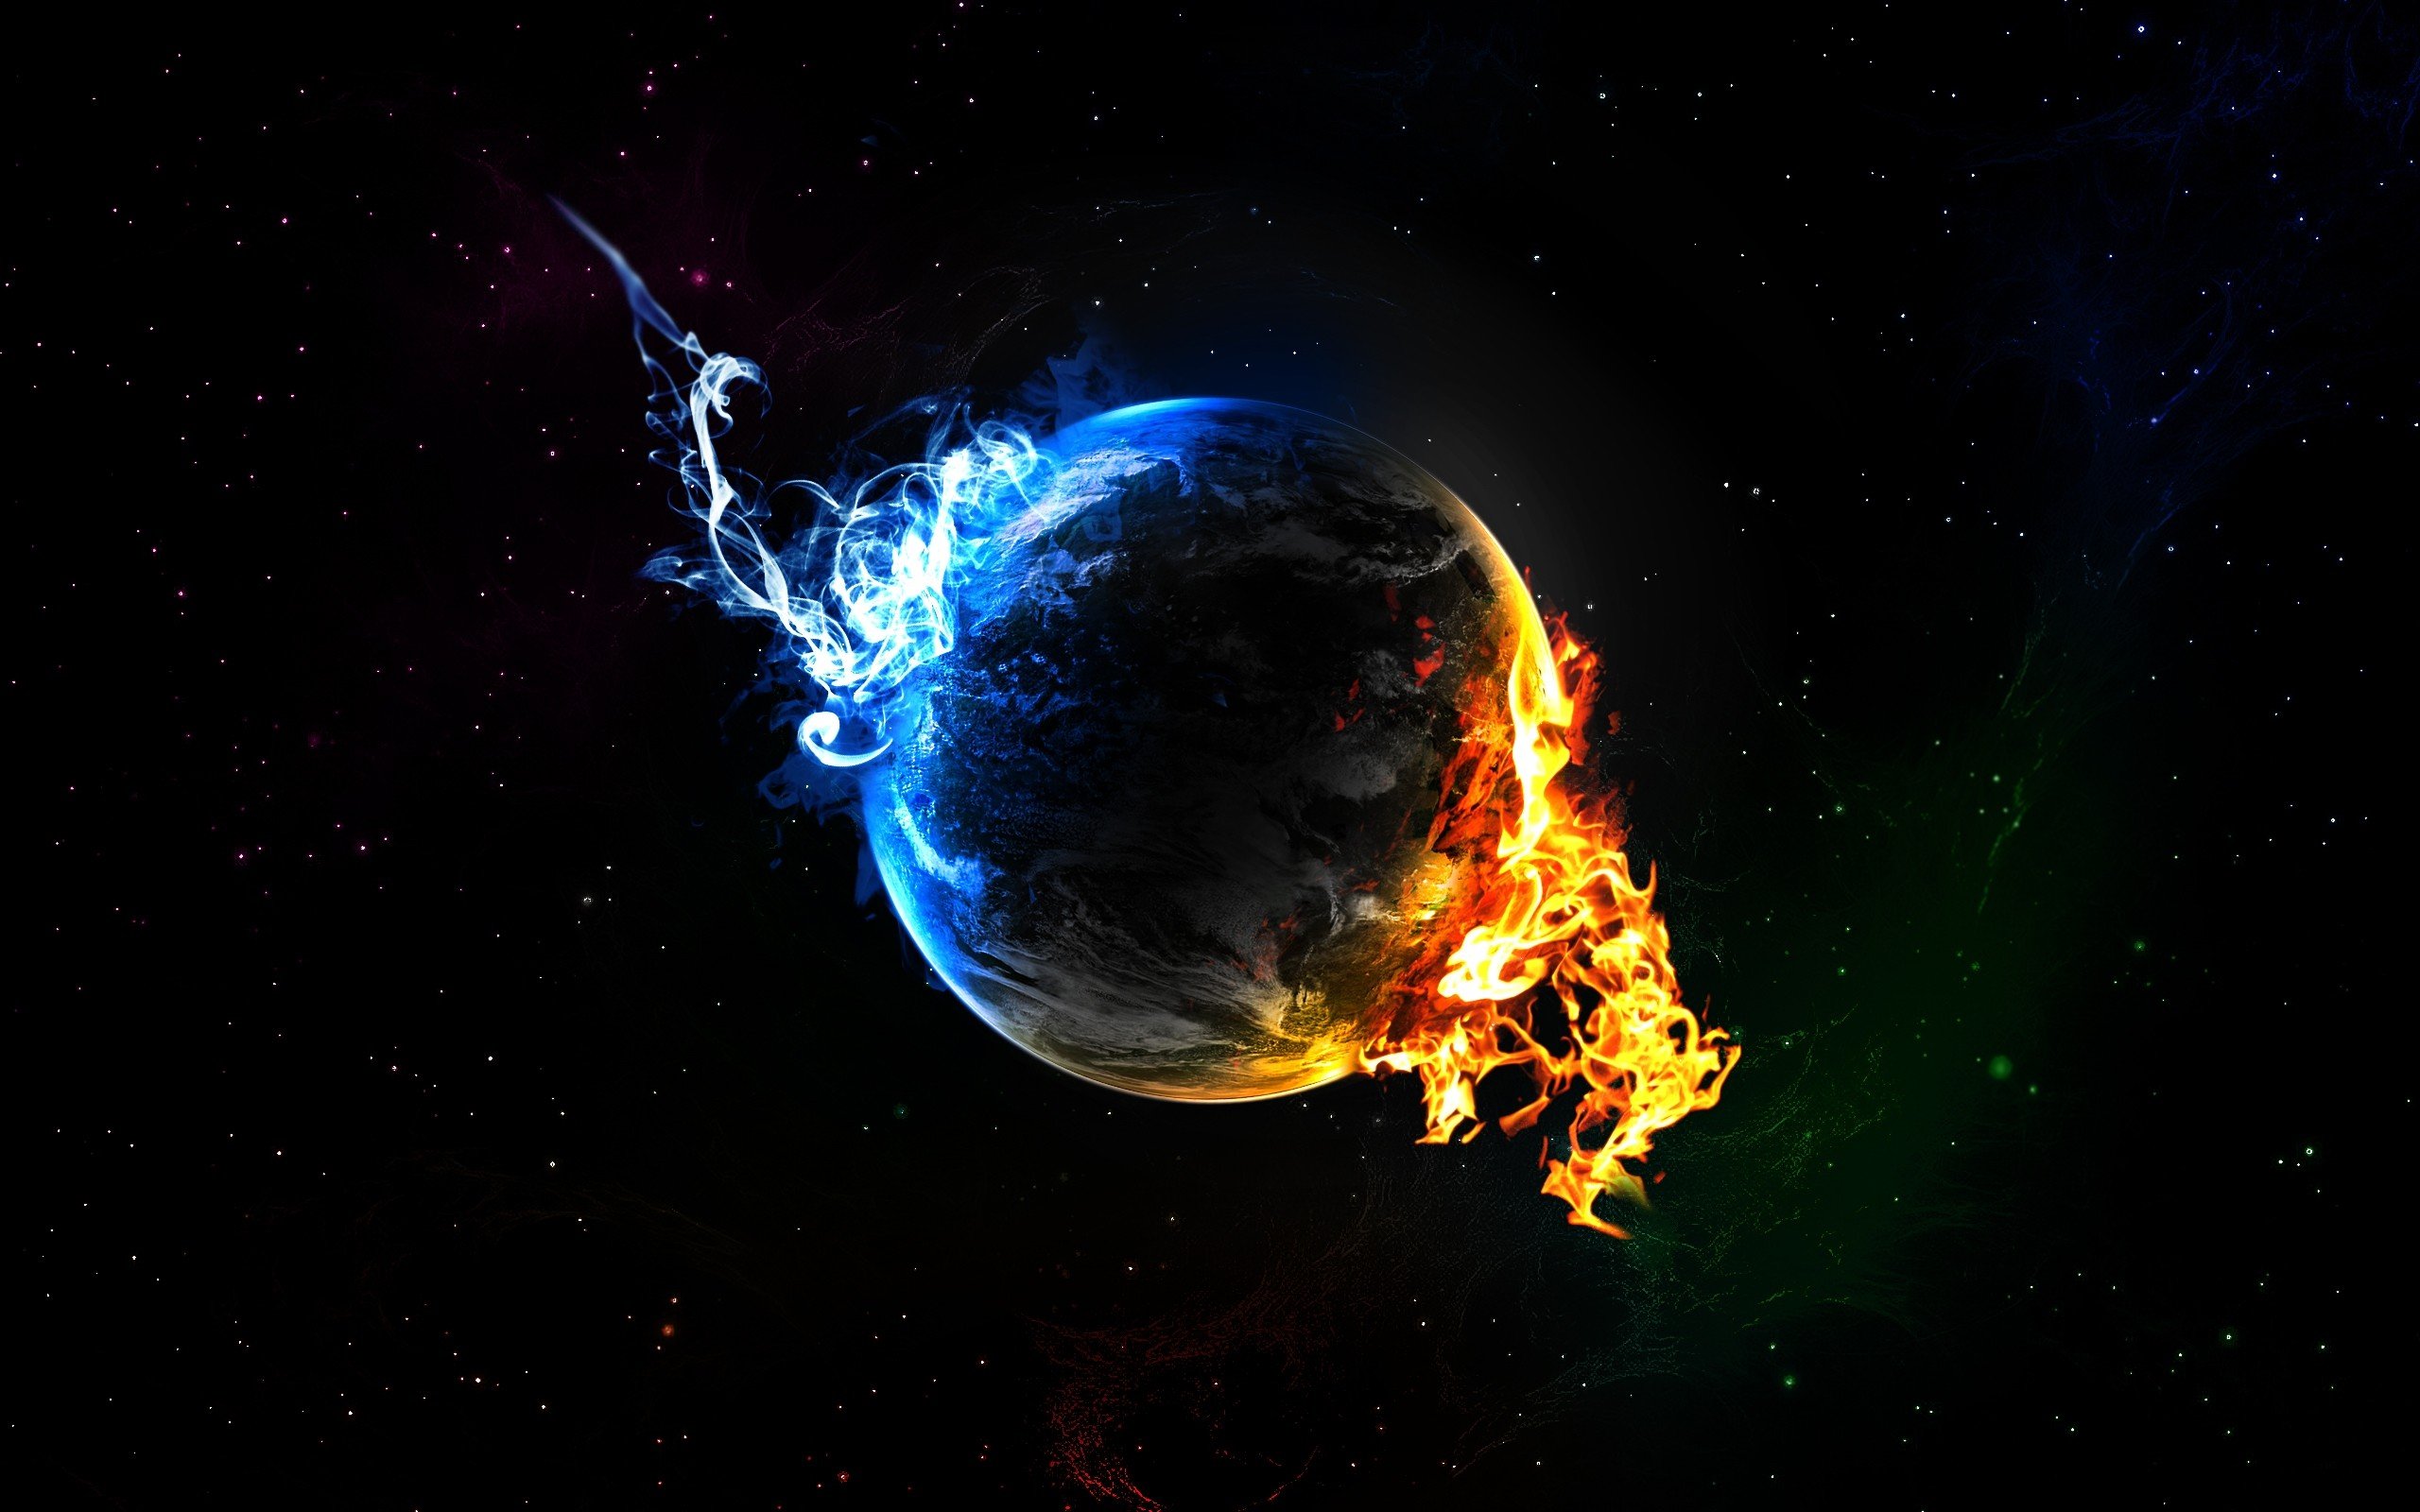 water, Outer, Space, Planets, Fire, Earth, Elements, Black, Background Wallpaper